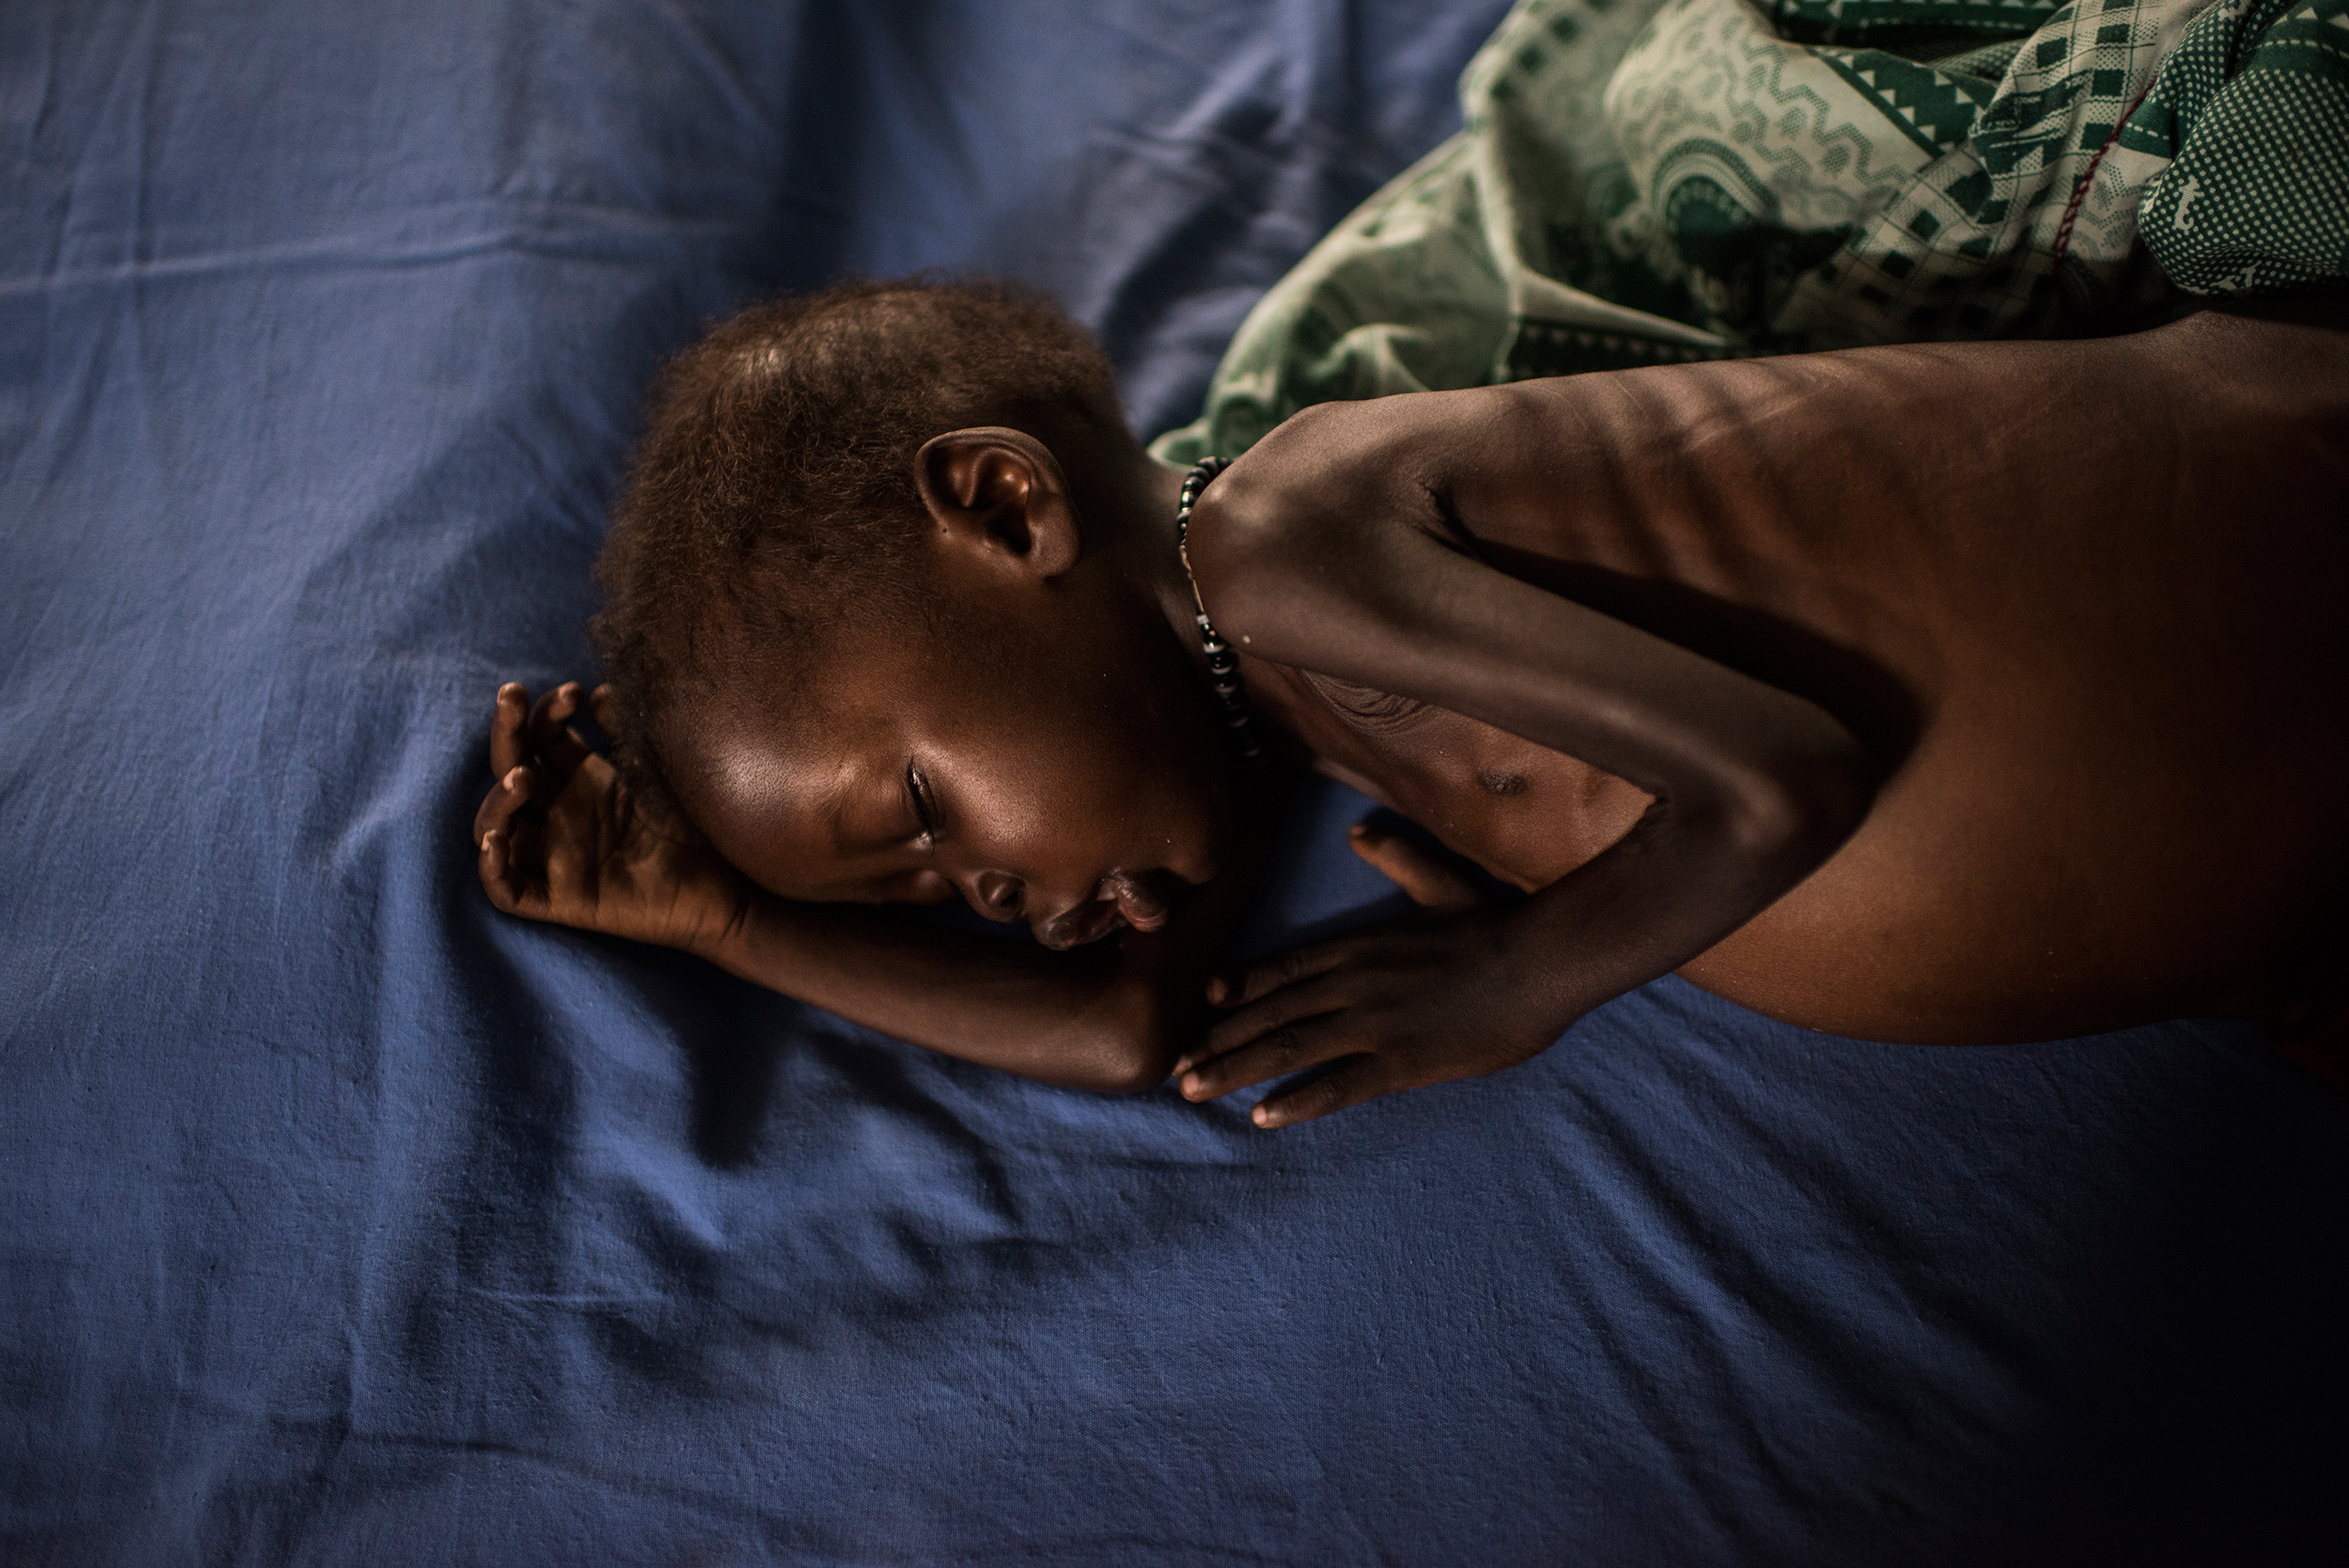 A severely malnourished child from the South Sudanese town of Leer receives treatment at the inpatient ward run by International Medical Corps at the Protection of Civilians site in Juba, South Sudan's capital, on March 22, 2016 (Lynsey Addario—Getty Images Reportage for TIME)